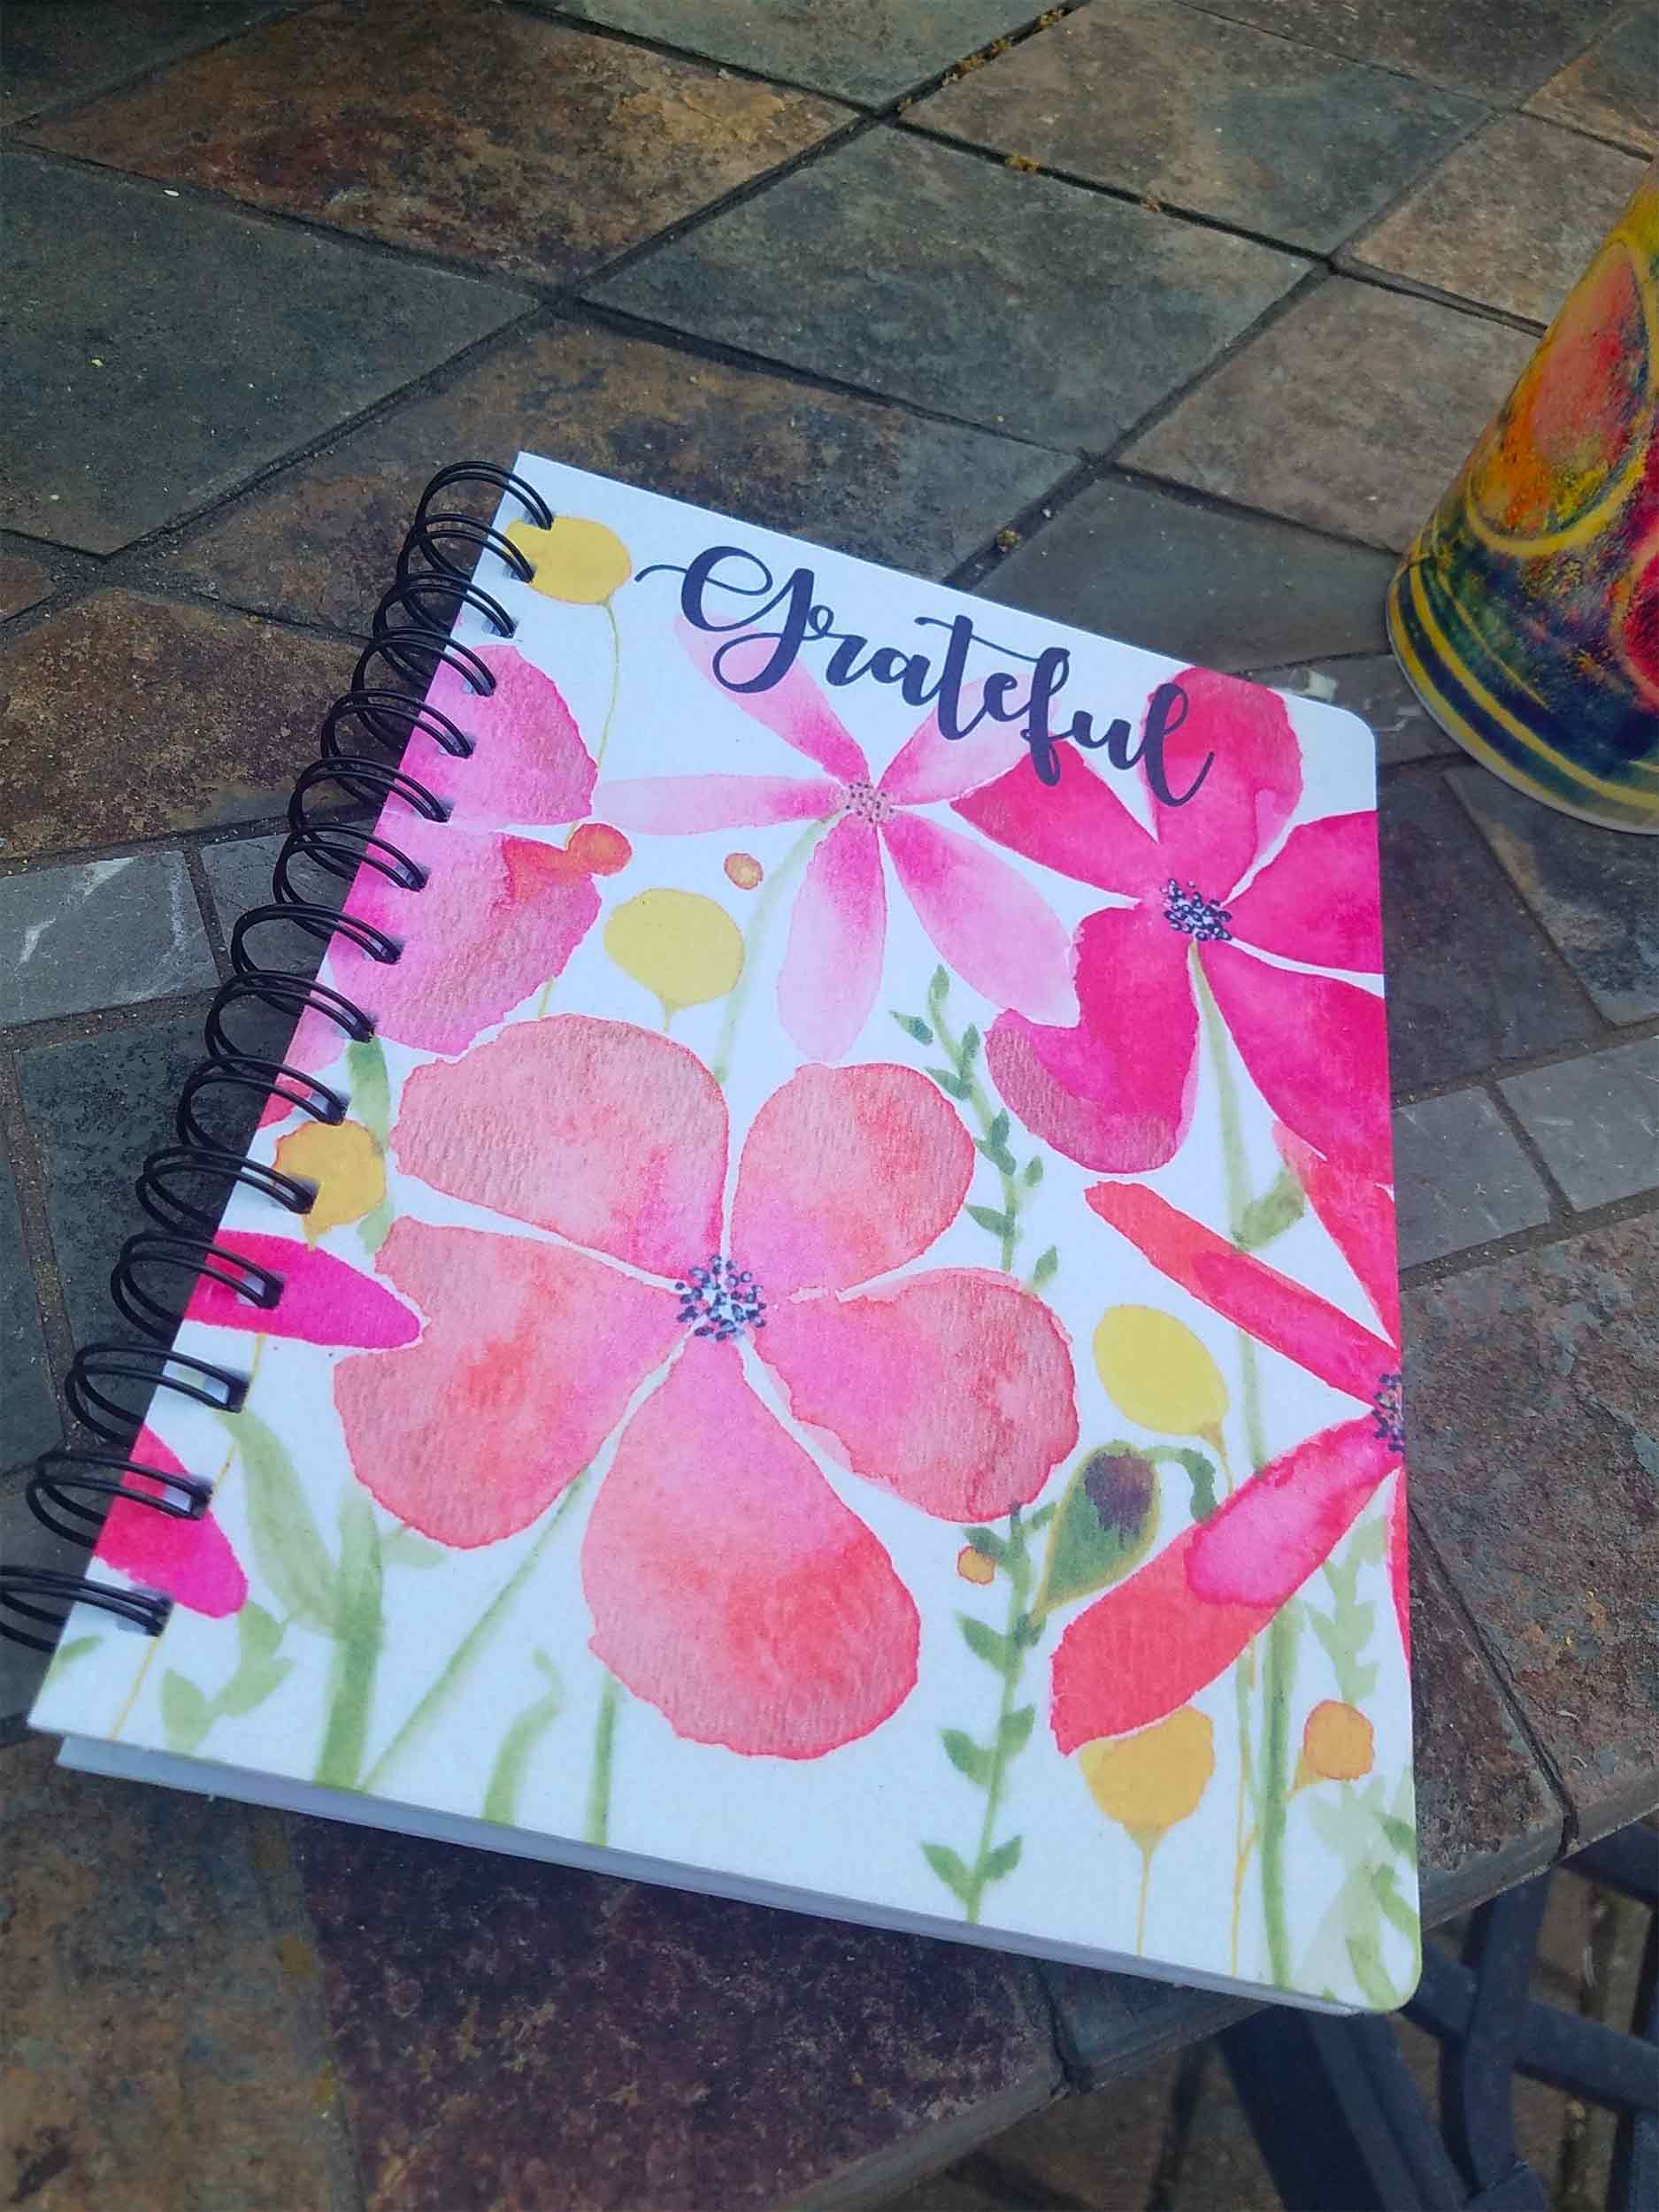 This Grateful -  Spiral Bound journal is made with love by Studio Patty D! Shop more unique gift ideas today with Spots Initiatives, the best way to support creators.